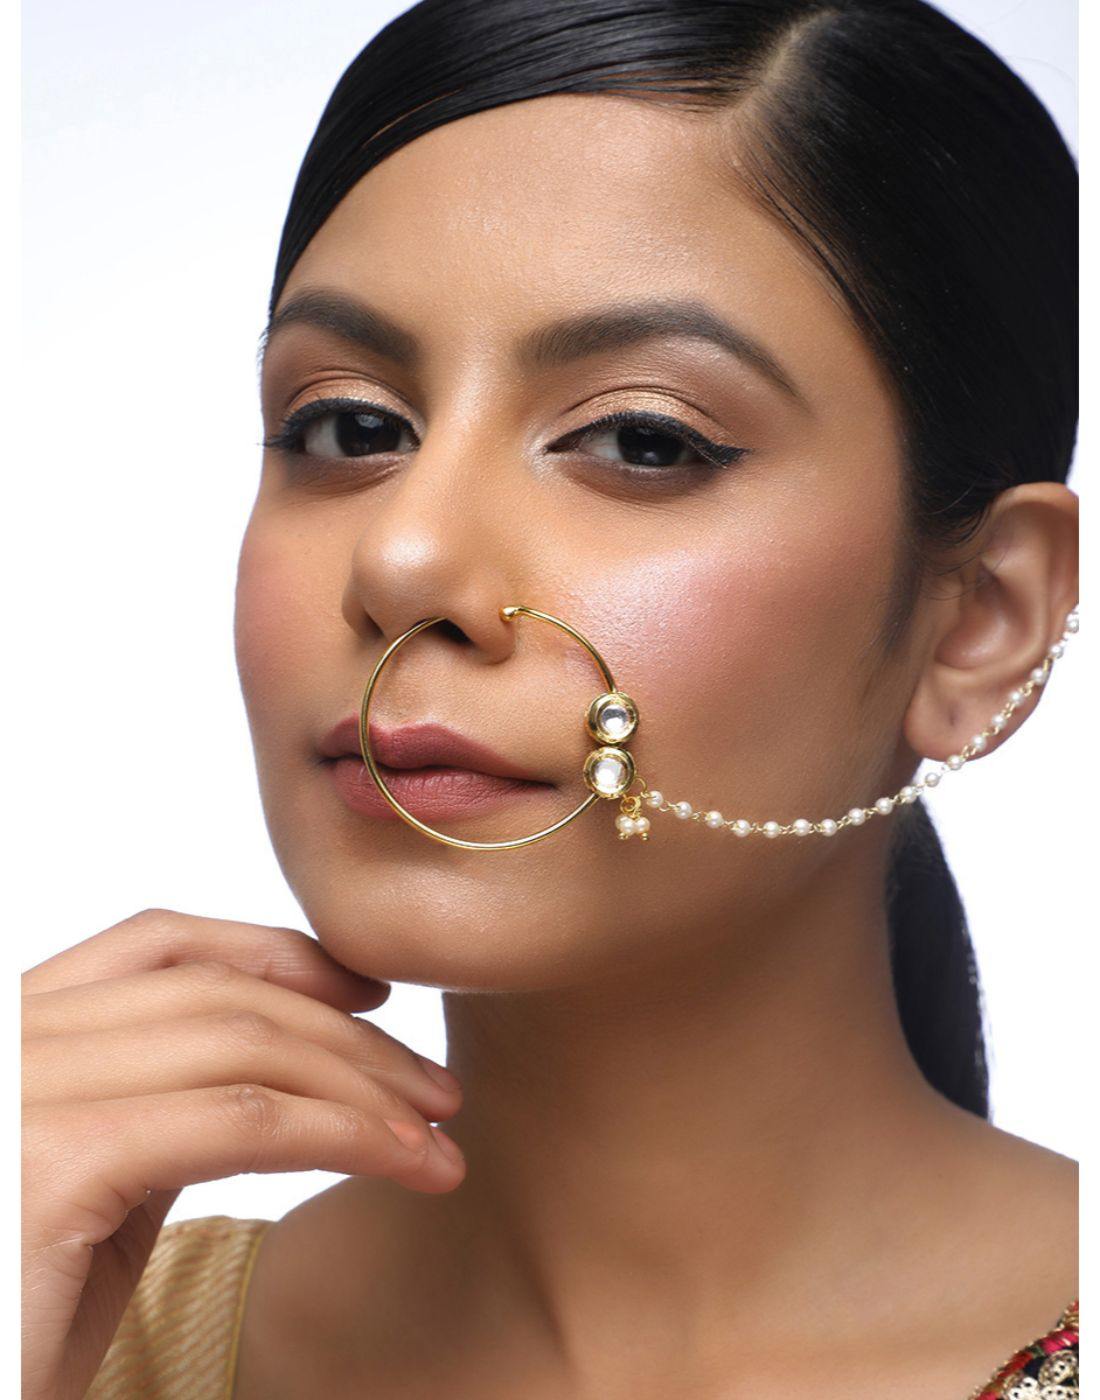 Amuse Accessories - Nose piercing Special! Amuse of Oxnard, this Saturday  from 2-8pm. $25 piercing - no appt - receive free nose ring! 805-988-4525 |  Facebook